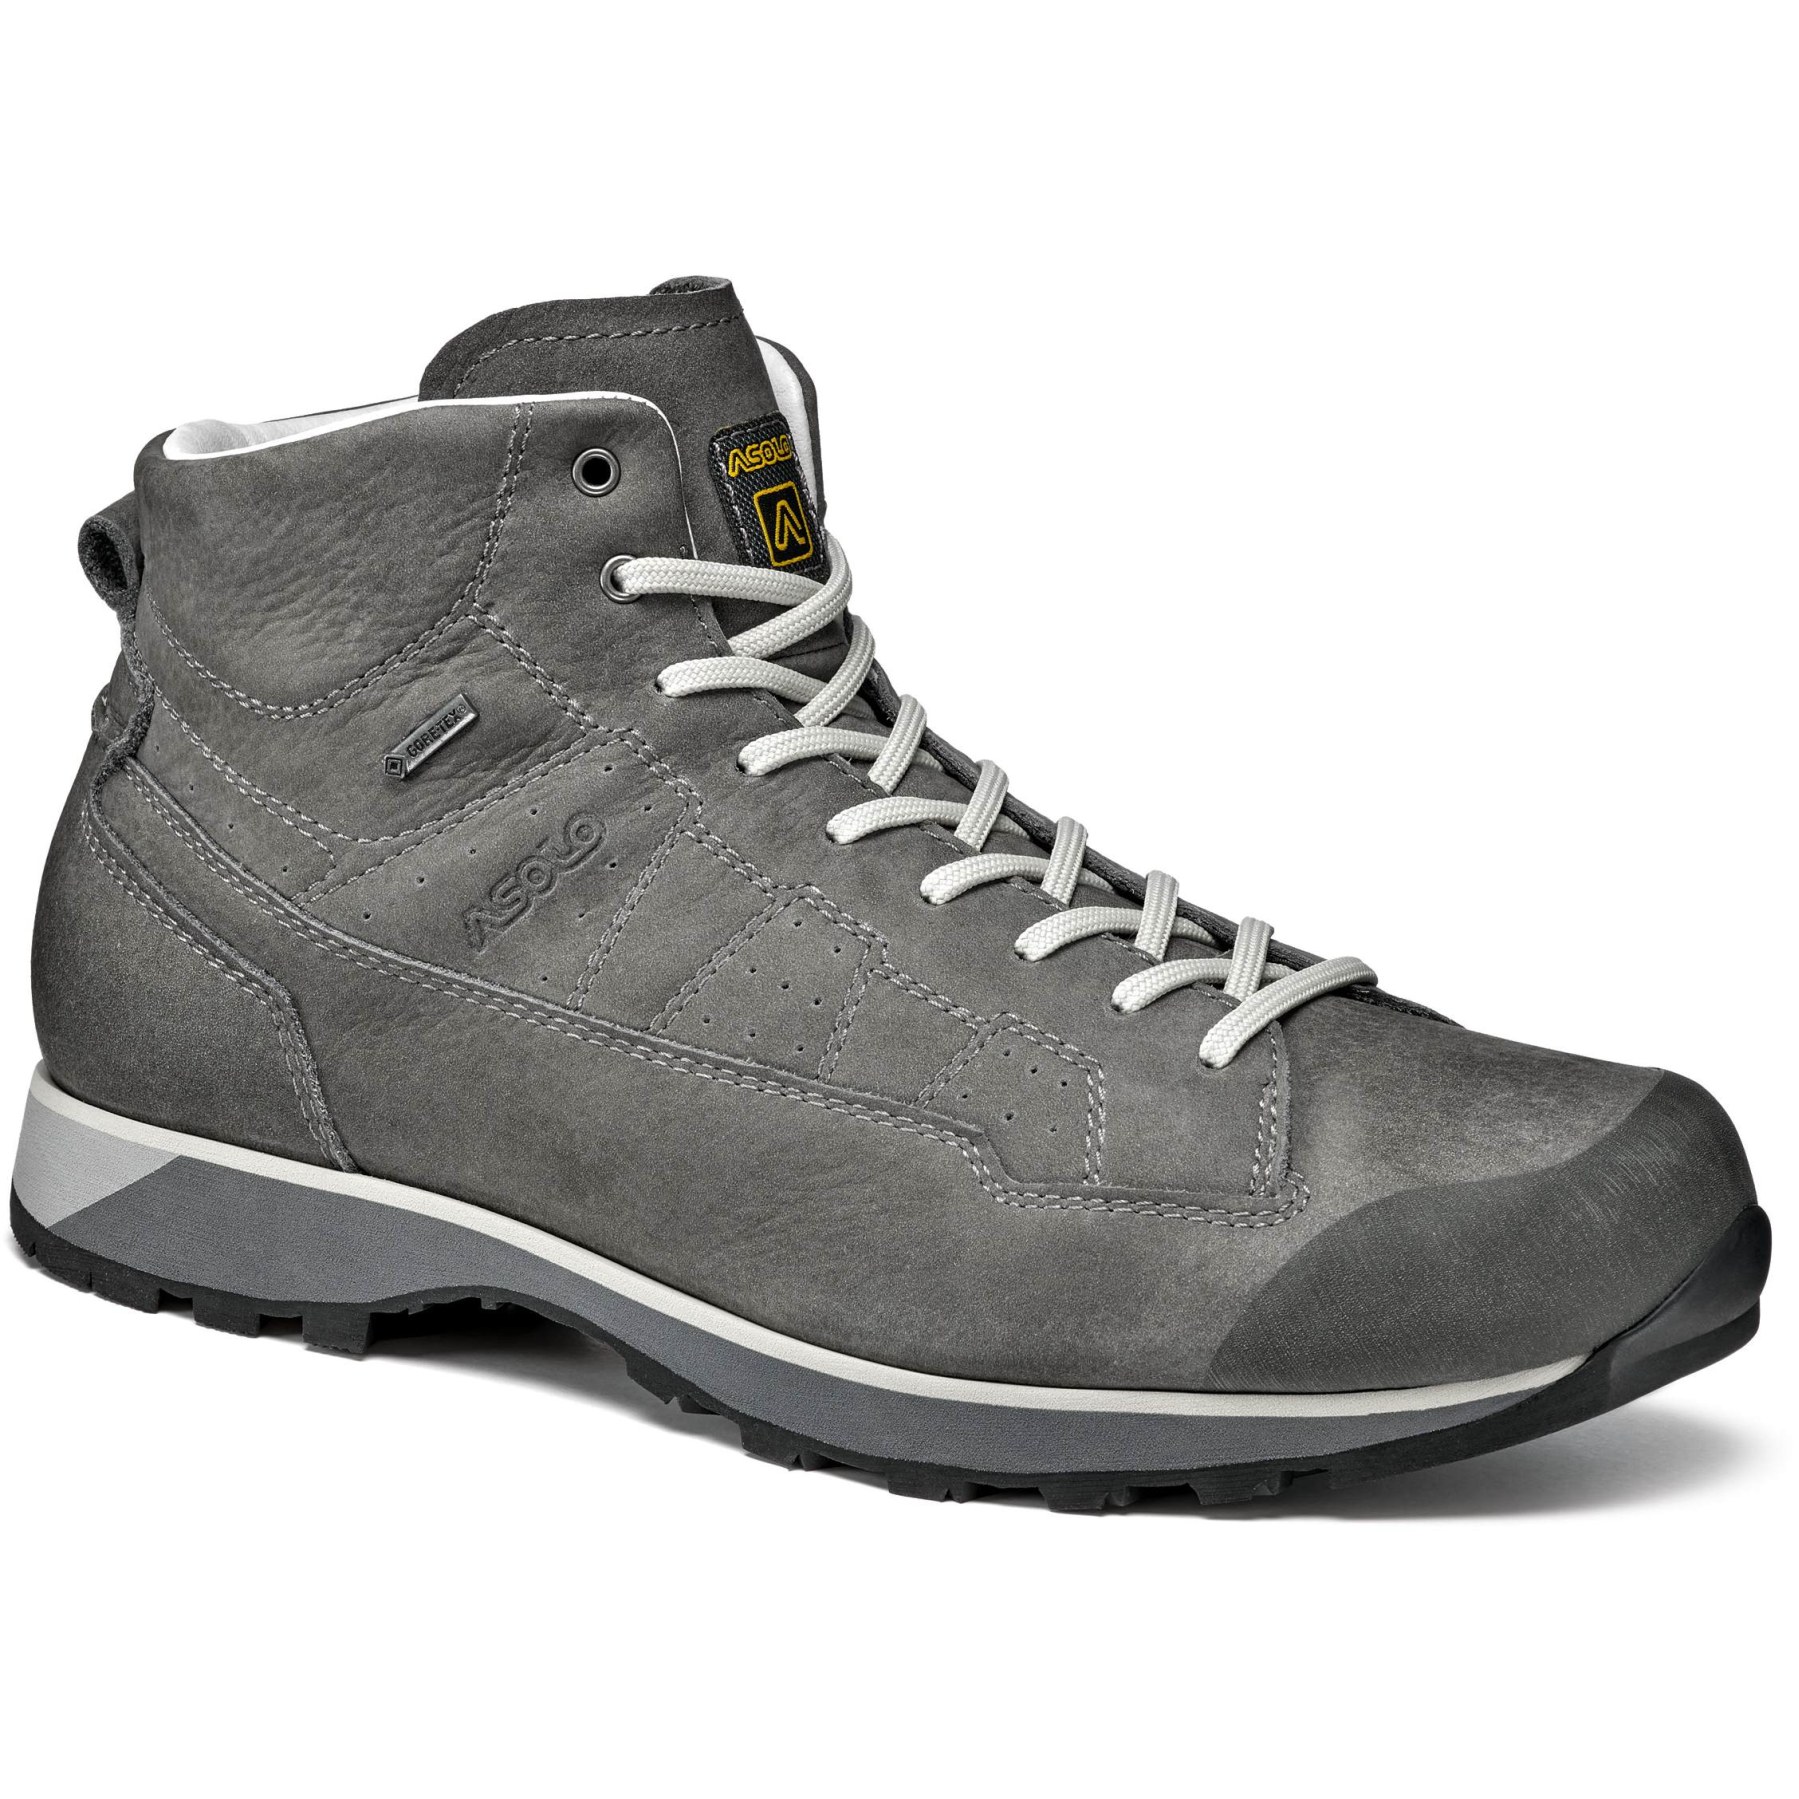 Image of Asolo Active GV MM Shoe - Grey